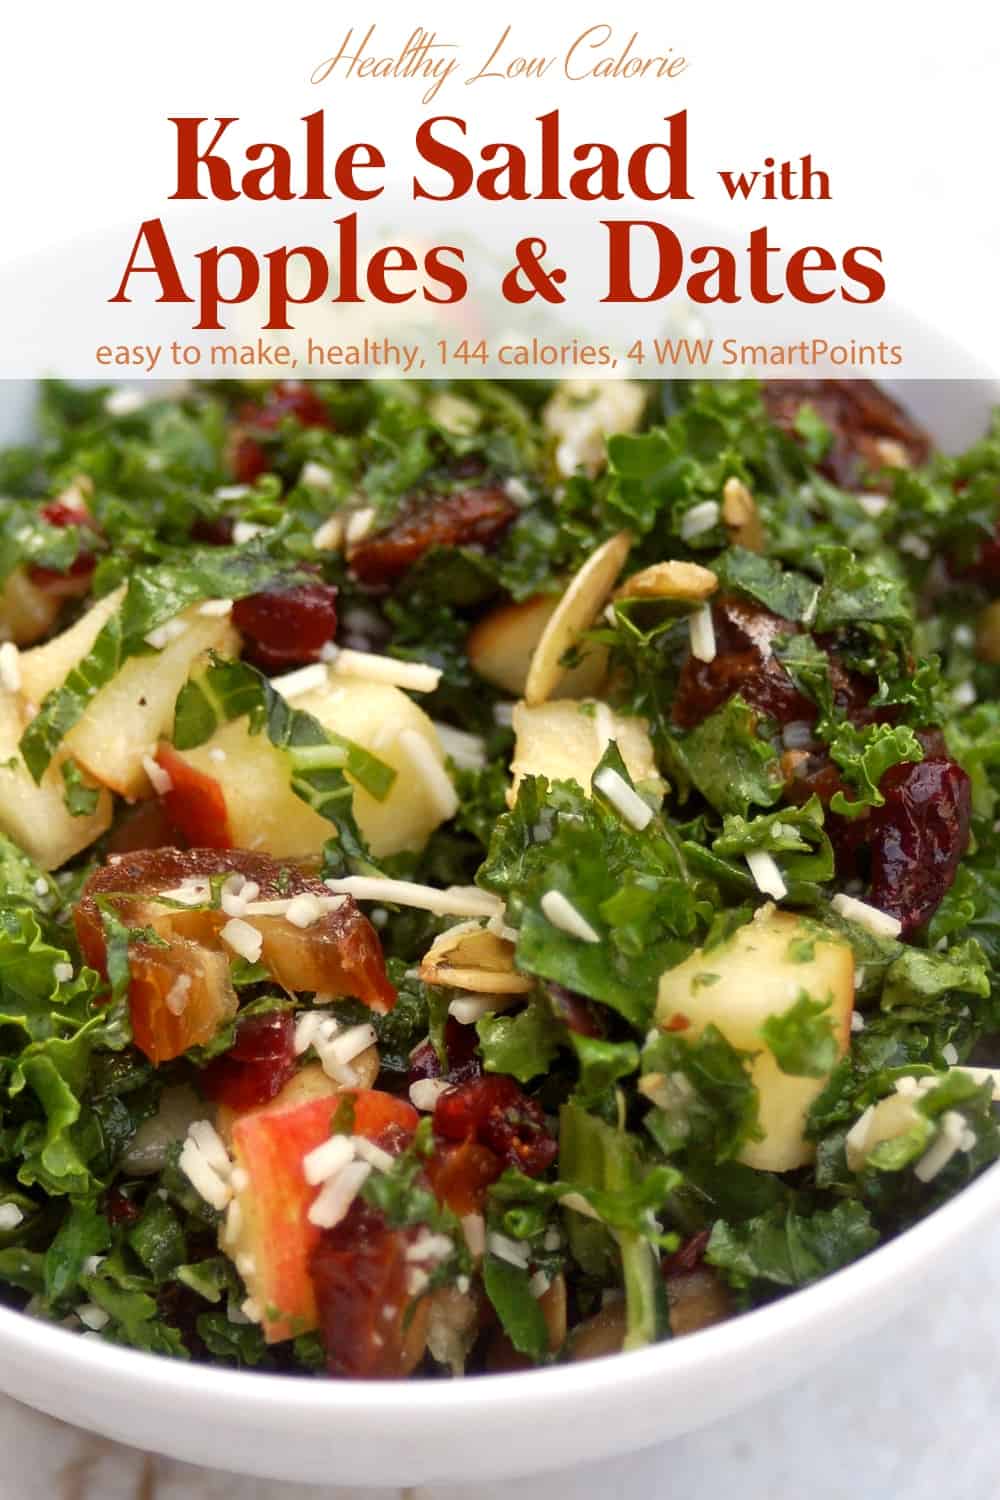 Kale salad with chopped fresh apples and dates in white serving bowl.